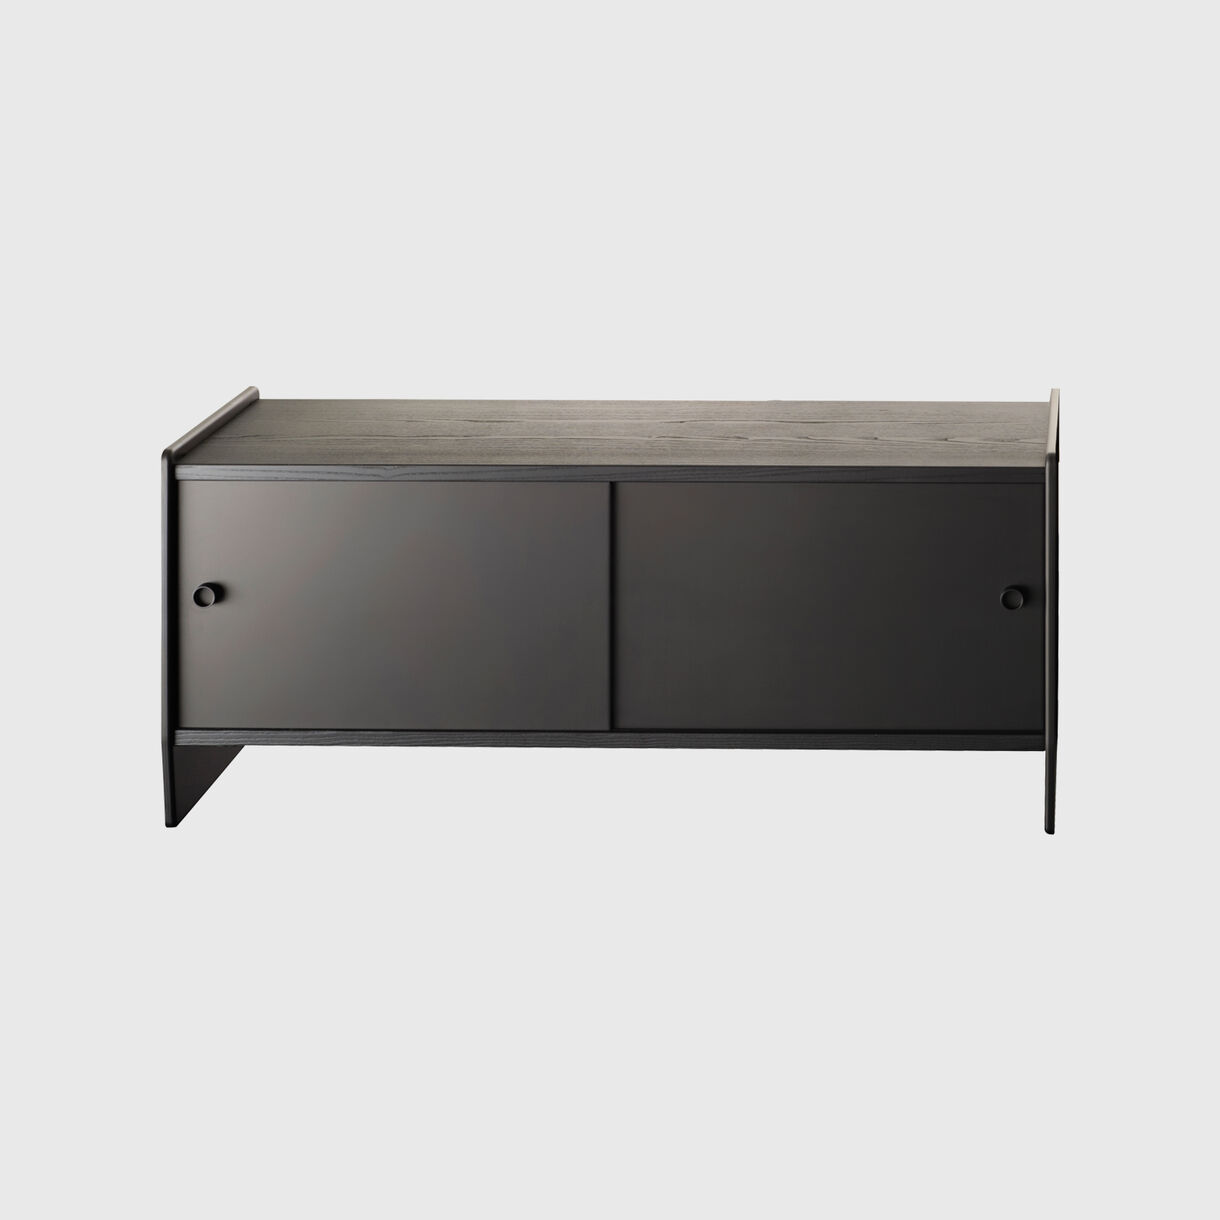 Theca sideboard